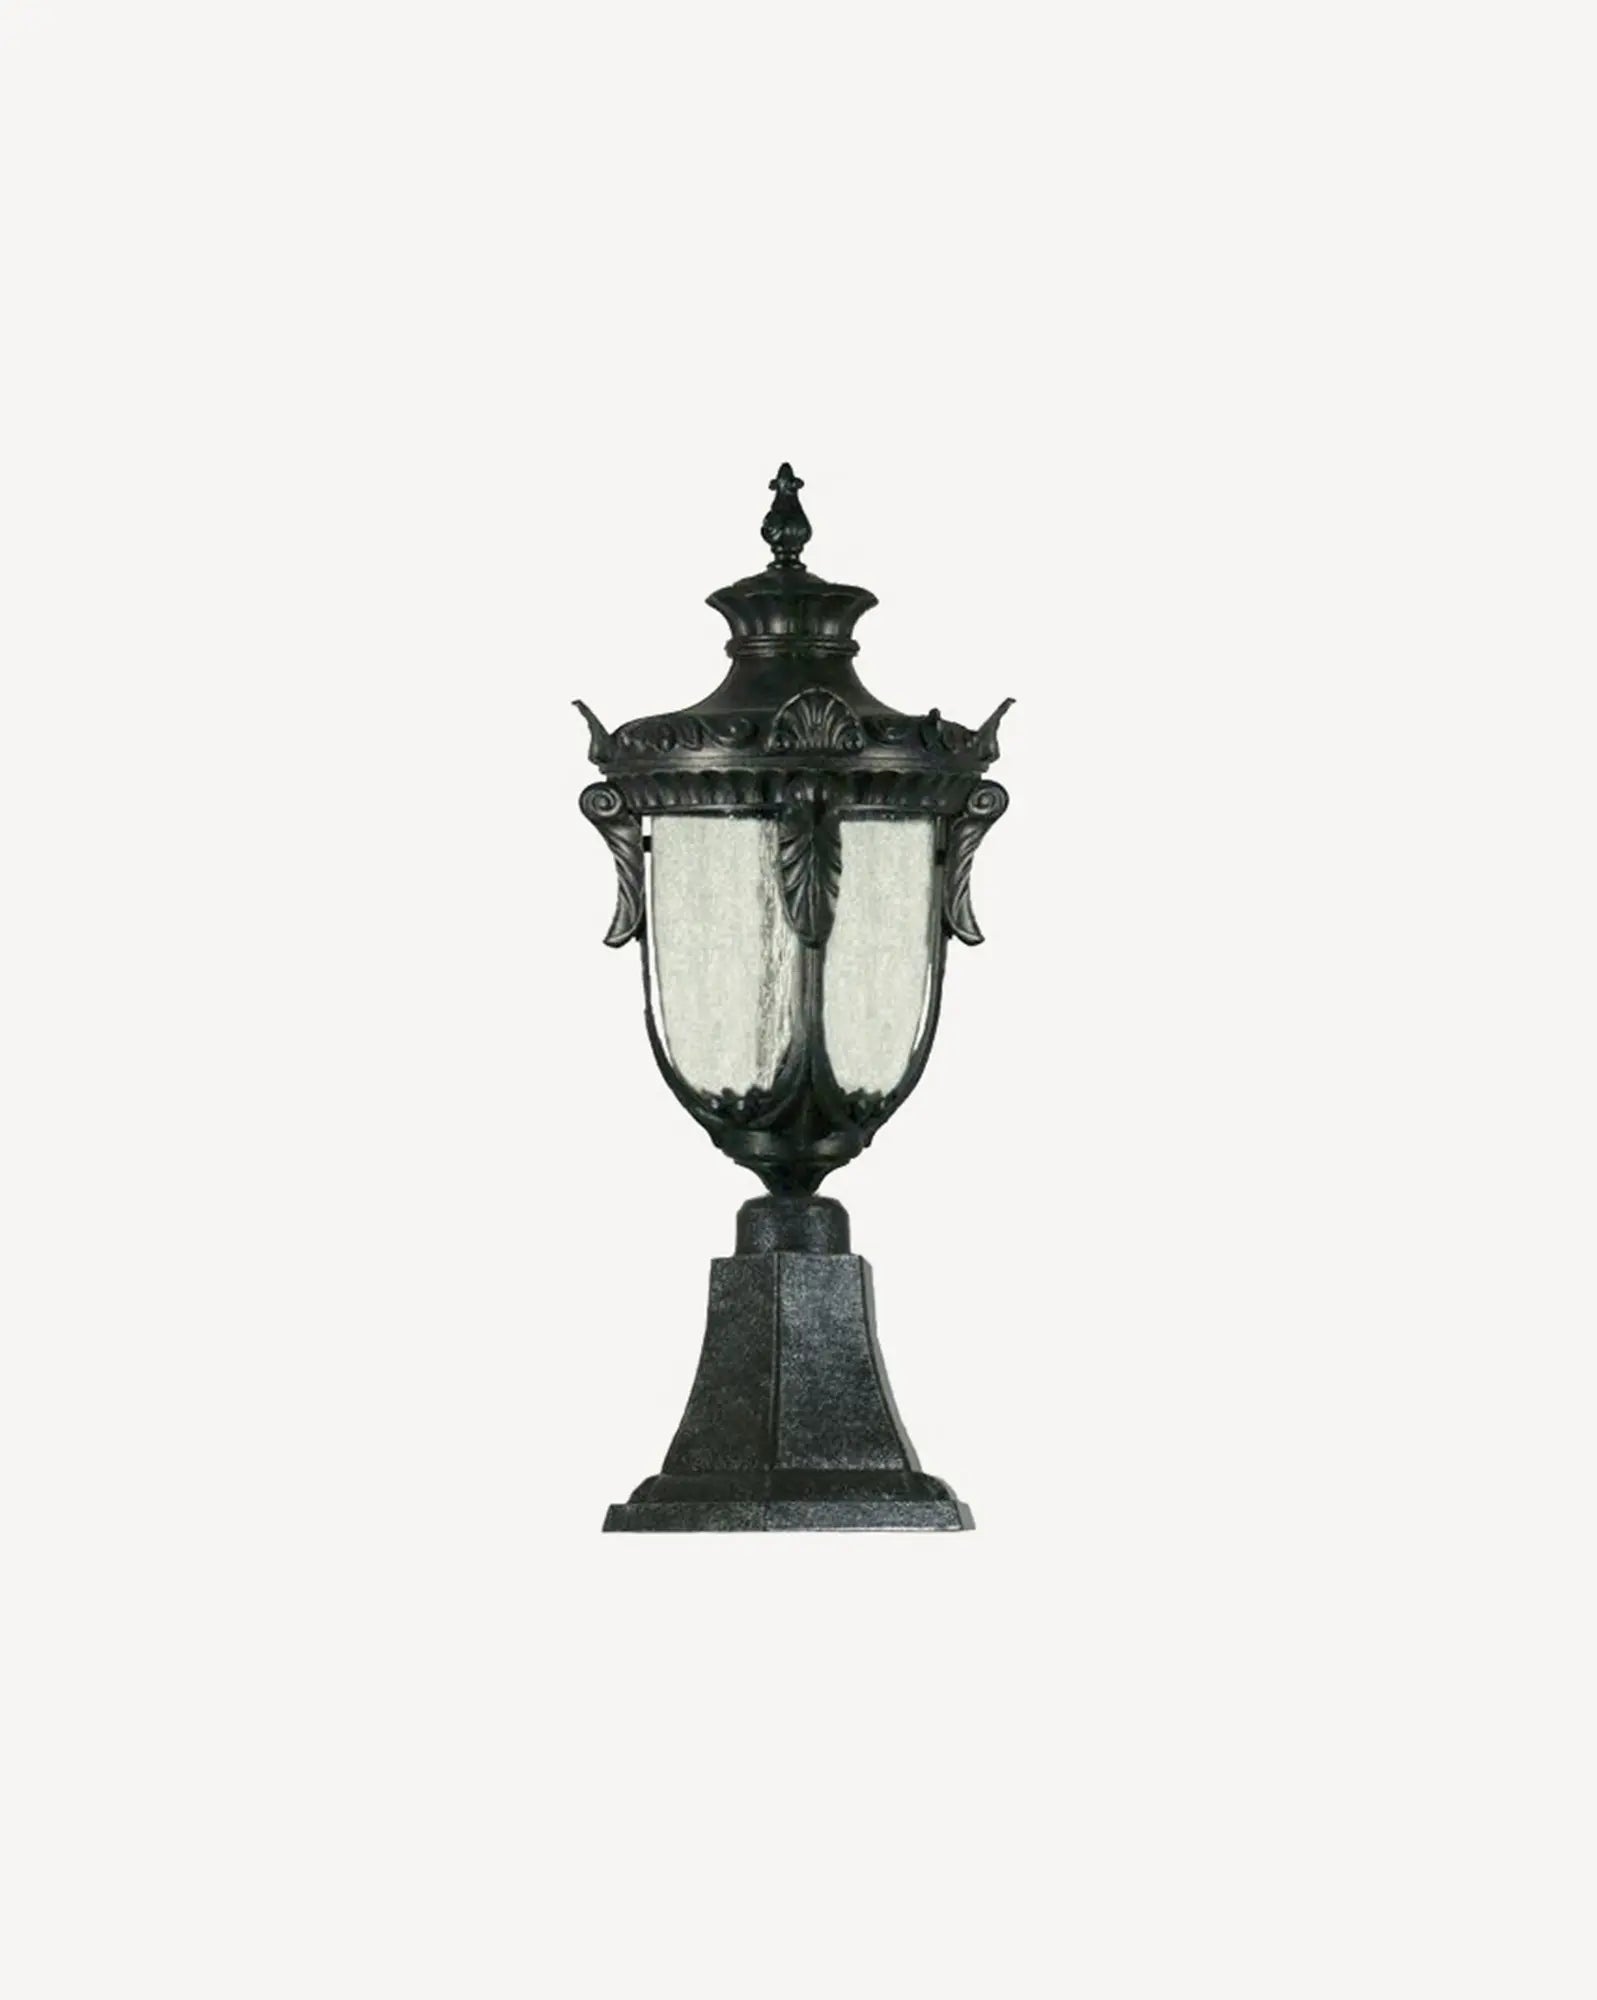 Wellington Pedestal Light by Inspiration Light at Nook Collections